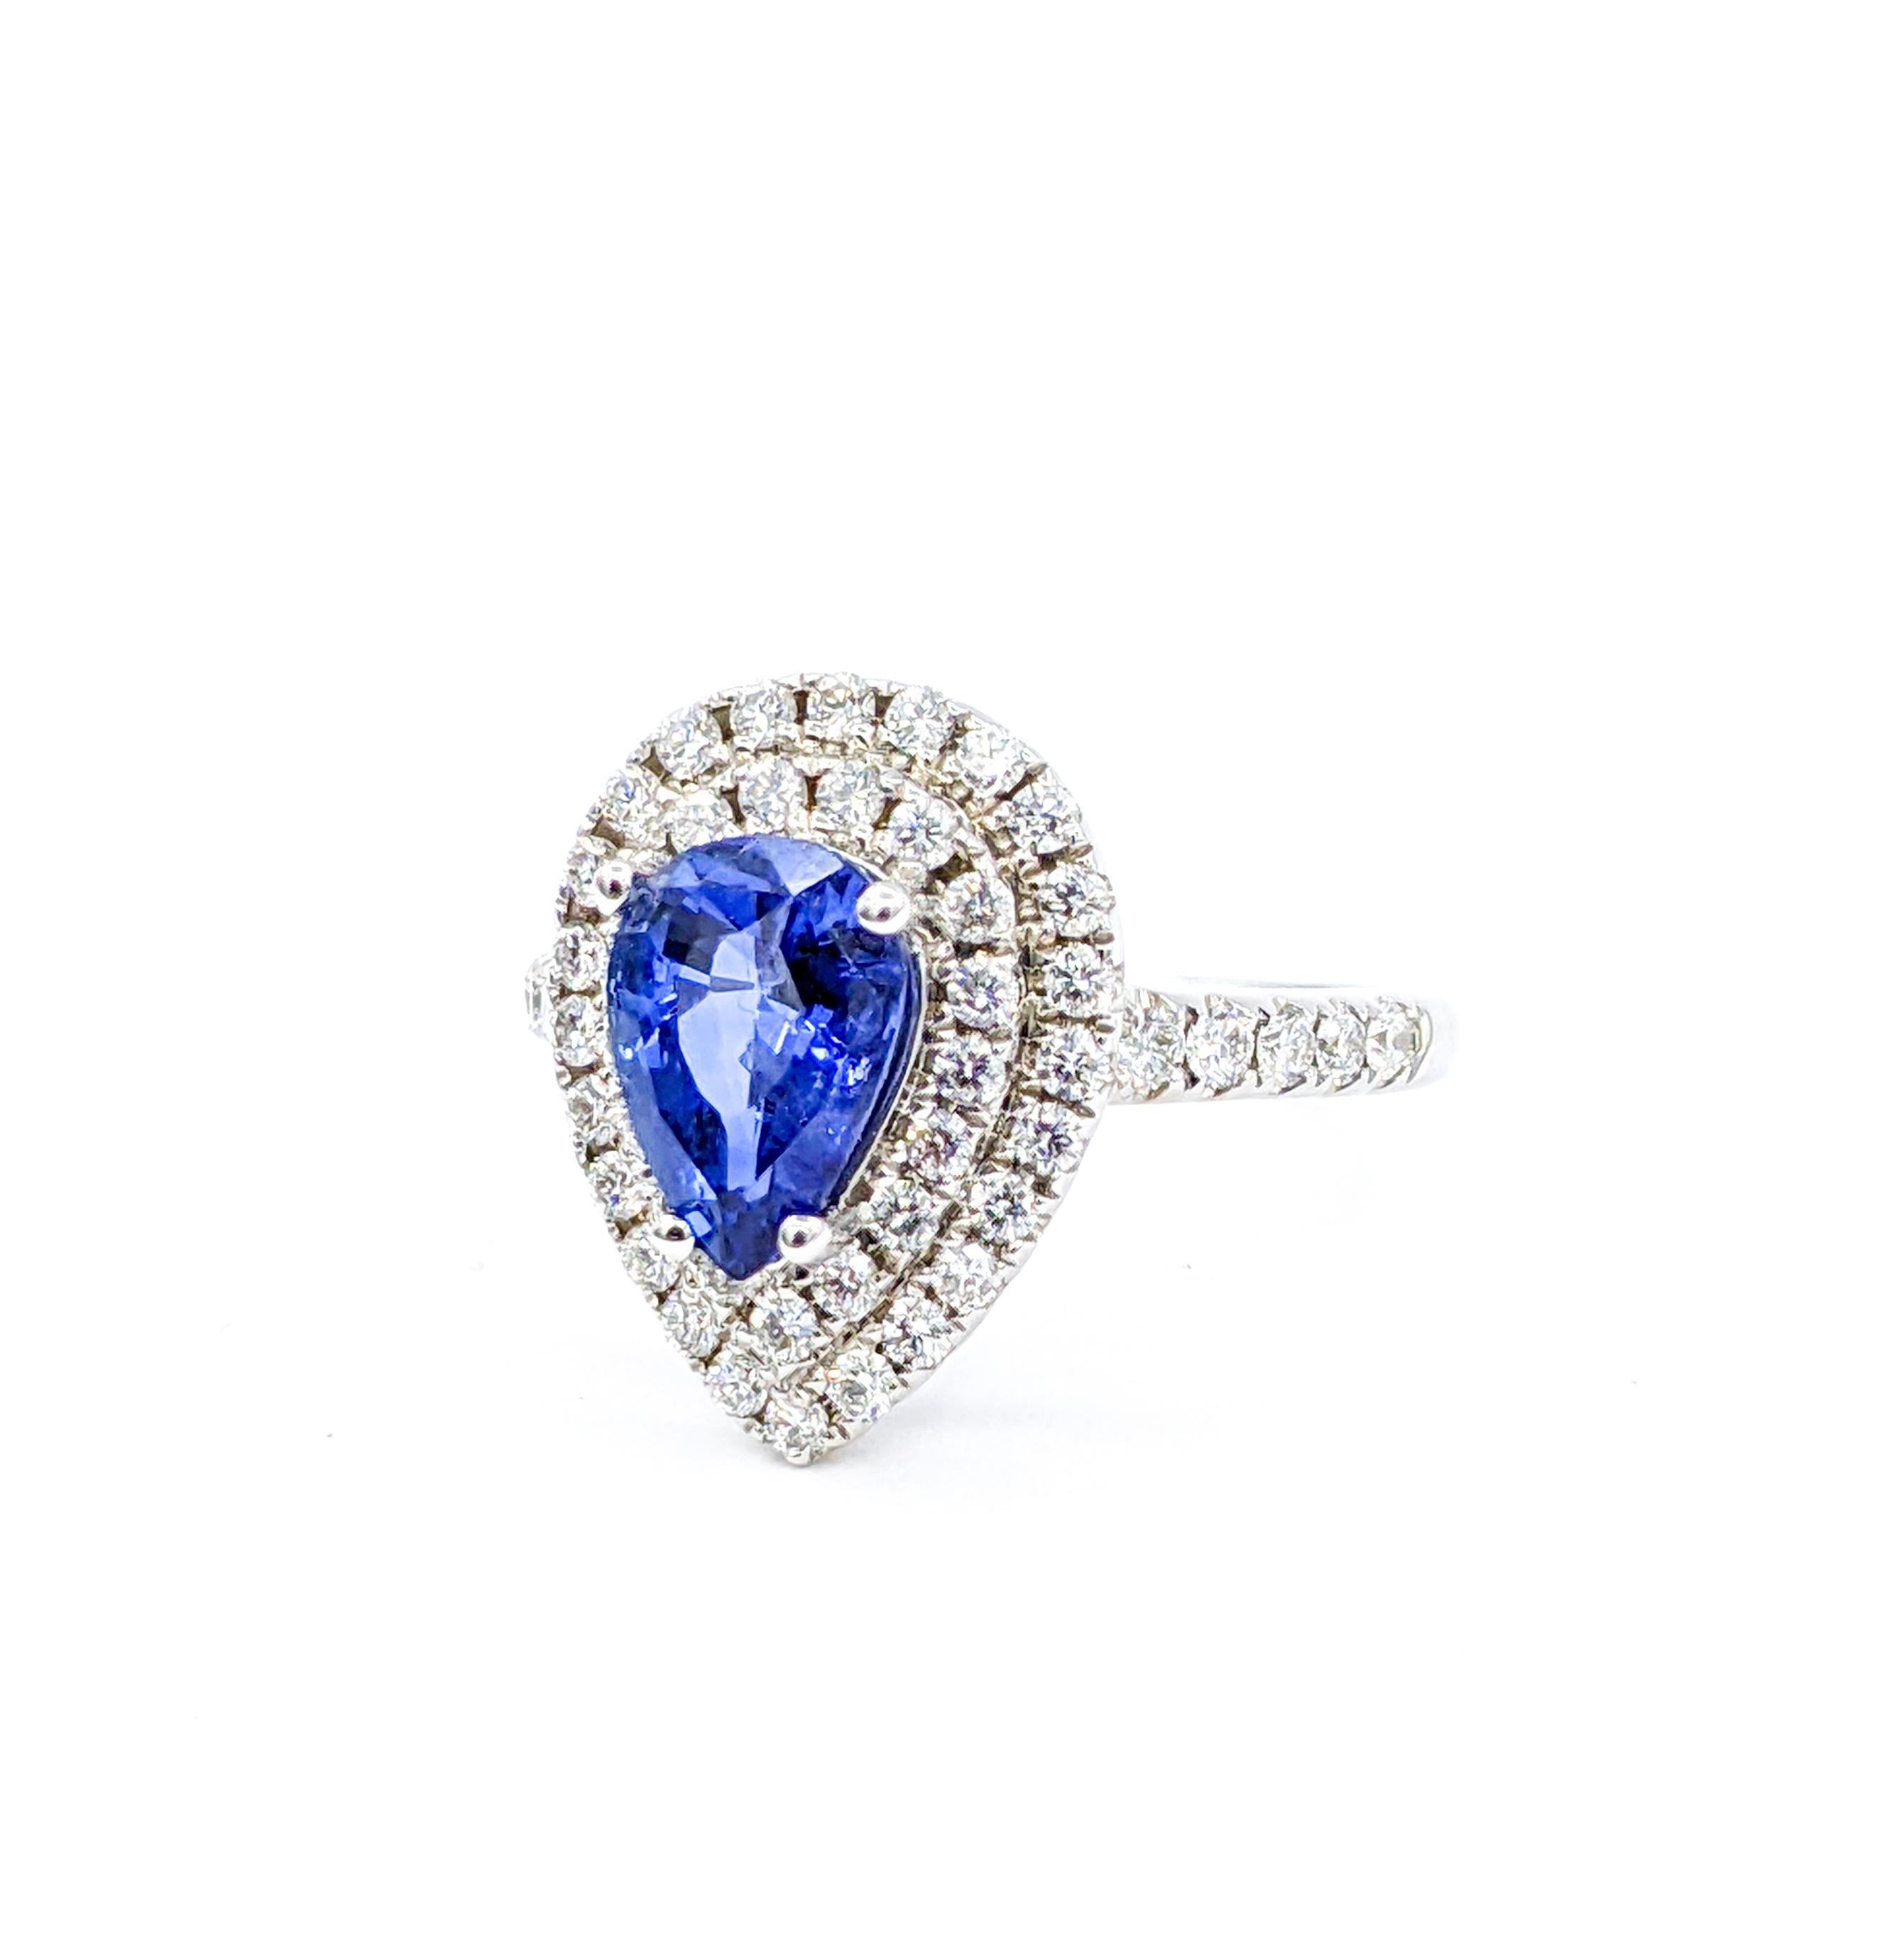 Stunning 2.00ct Sapphire & Diamond Cocktail Ring - 18K White Gold For Sale 3